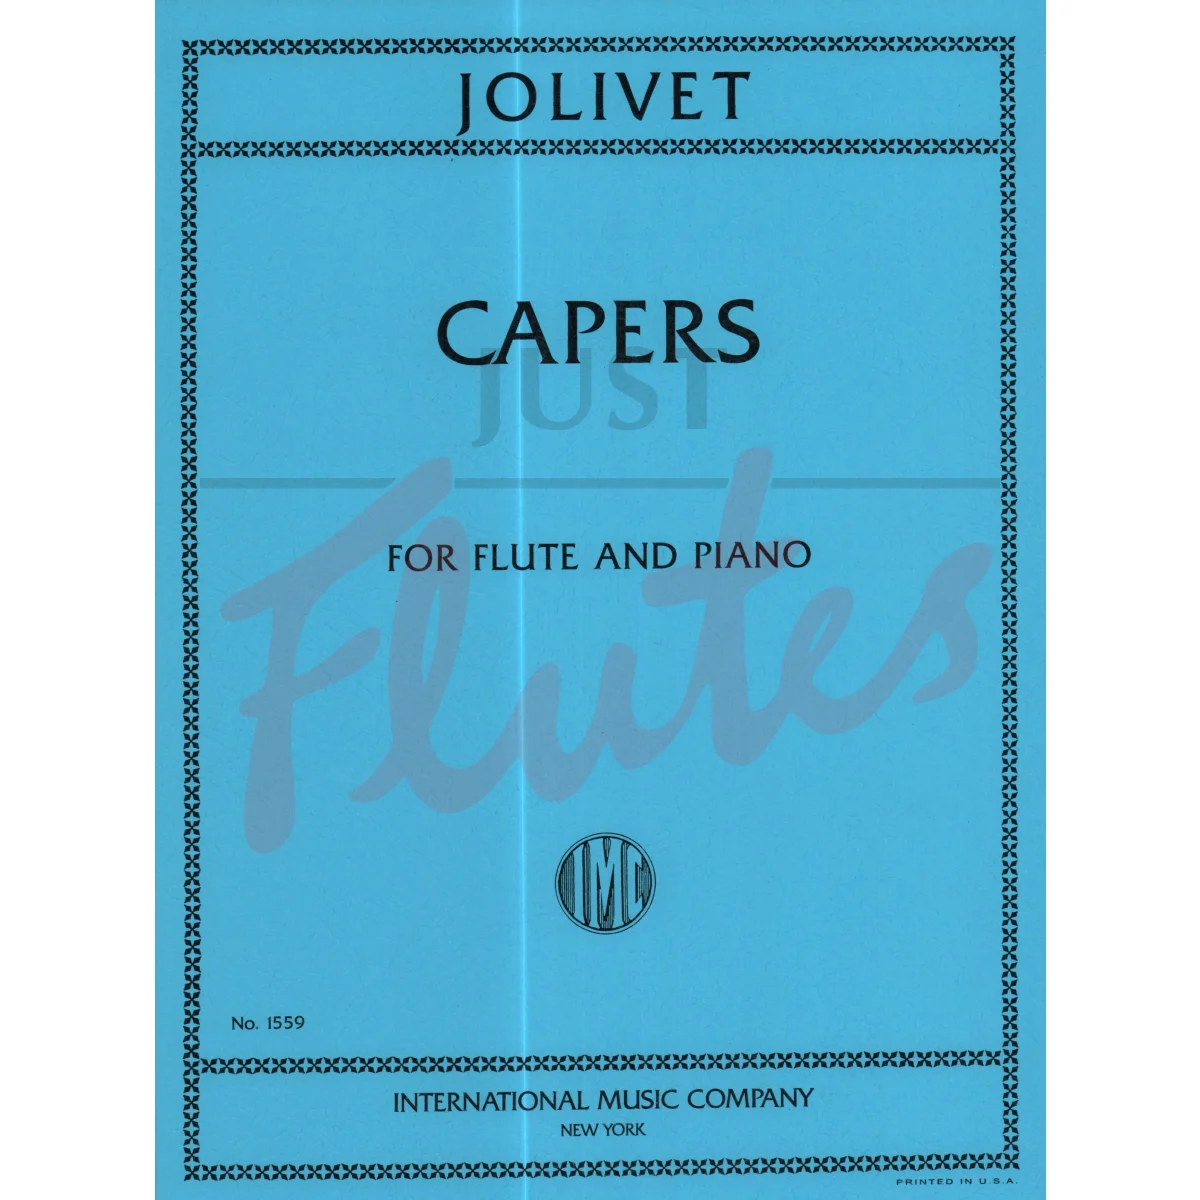 Capers for Flute and Piano